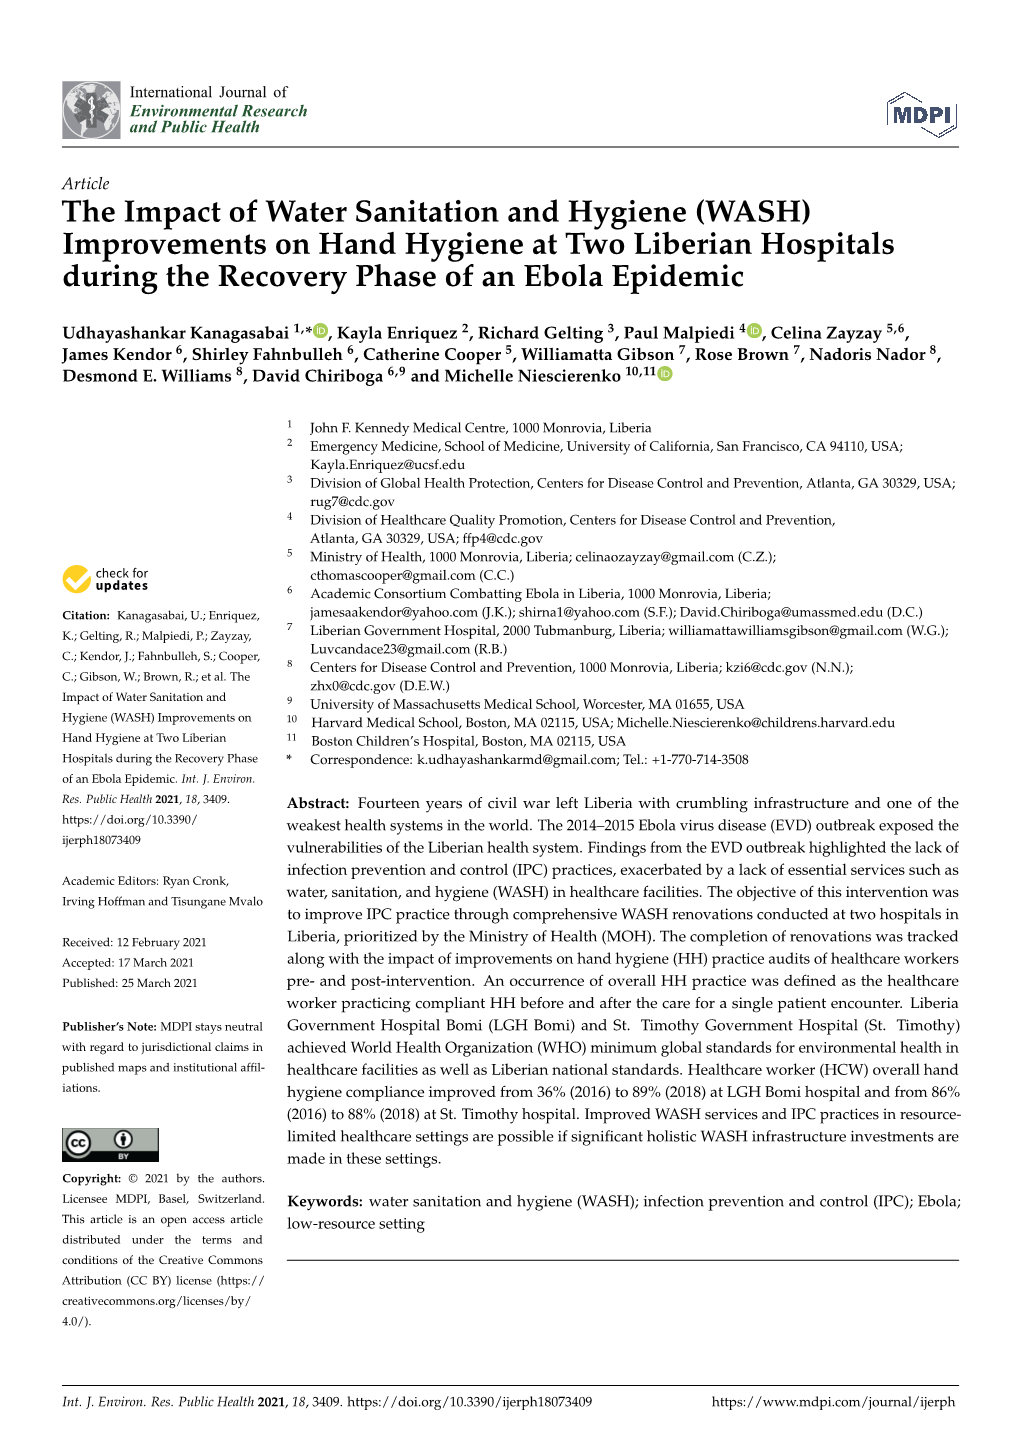 The Impact of Water Sanitation and Hygiene (WASH) Improvements on Hand Hygiene at Two Liberian Hospitals During the Recovery Phase of an Ebola Epidemic